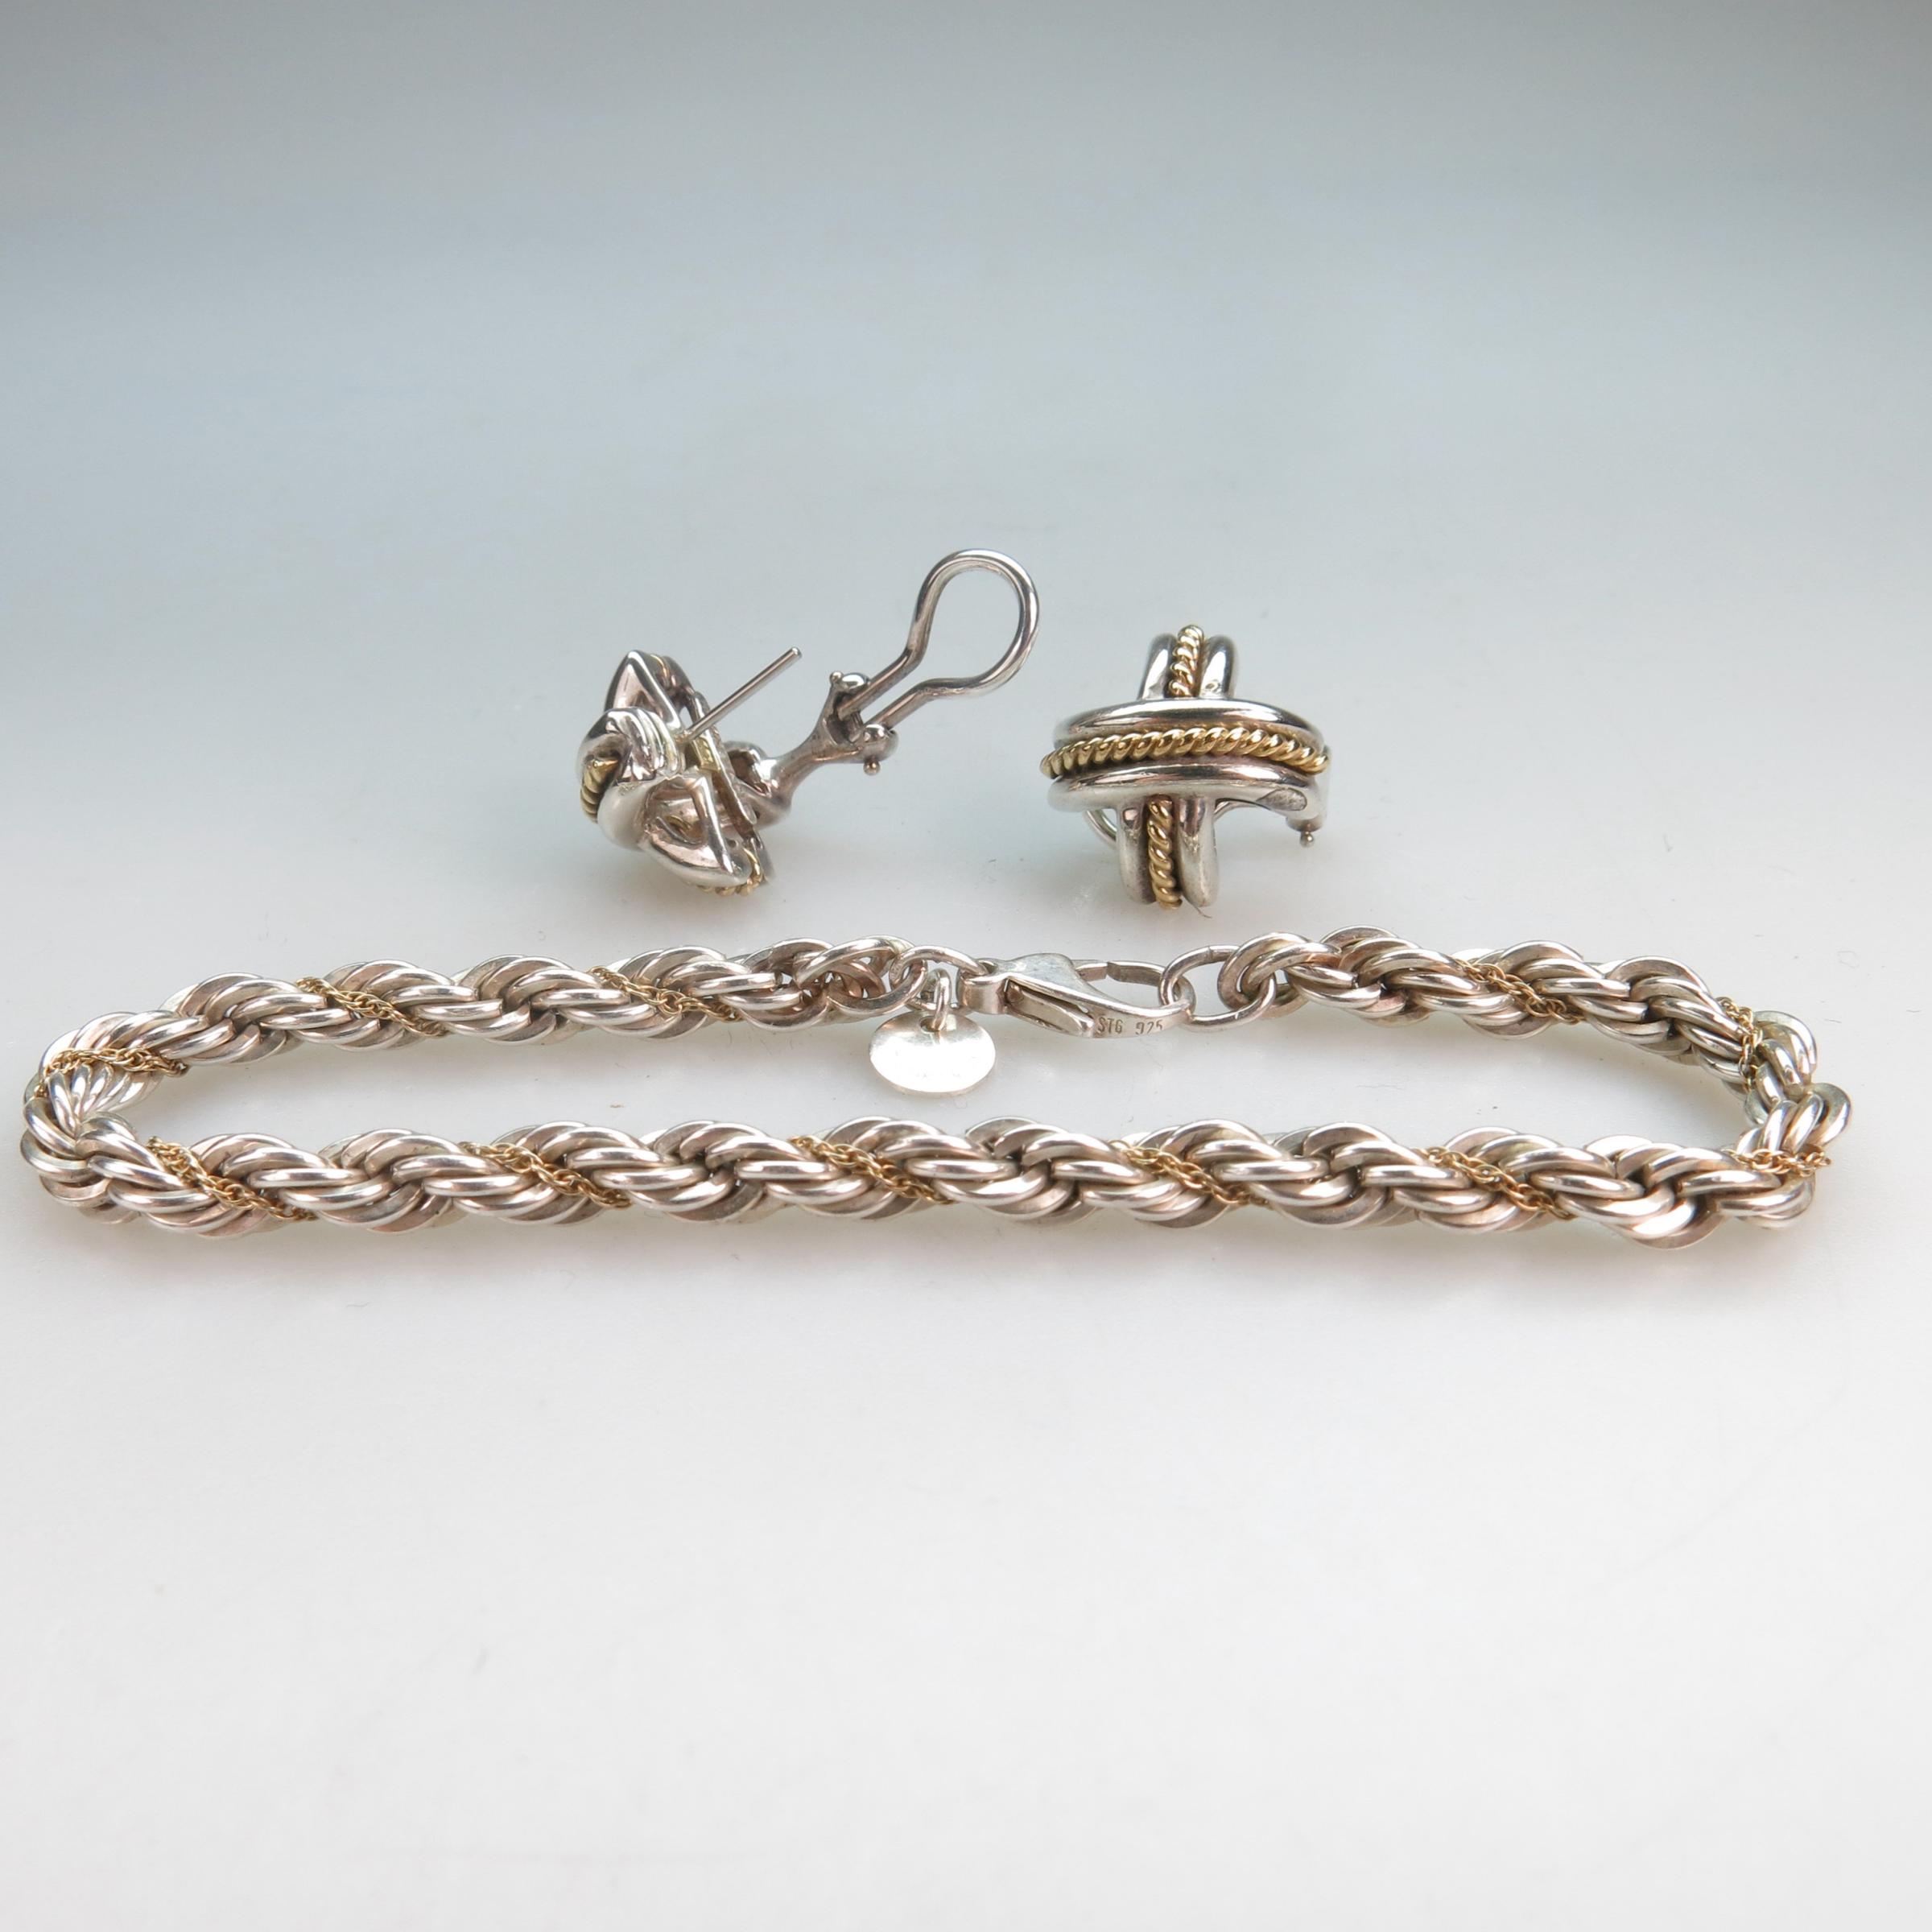 Tiffany & Co. Sterling Silver And 18k Yellow Gold Earrings And Rope Bracelet